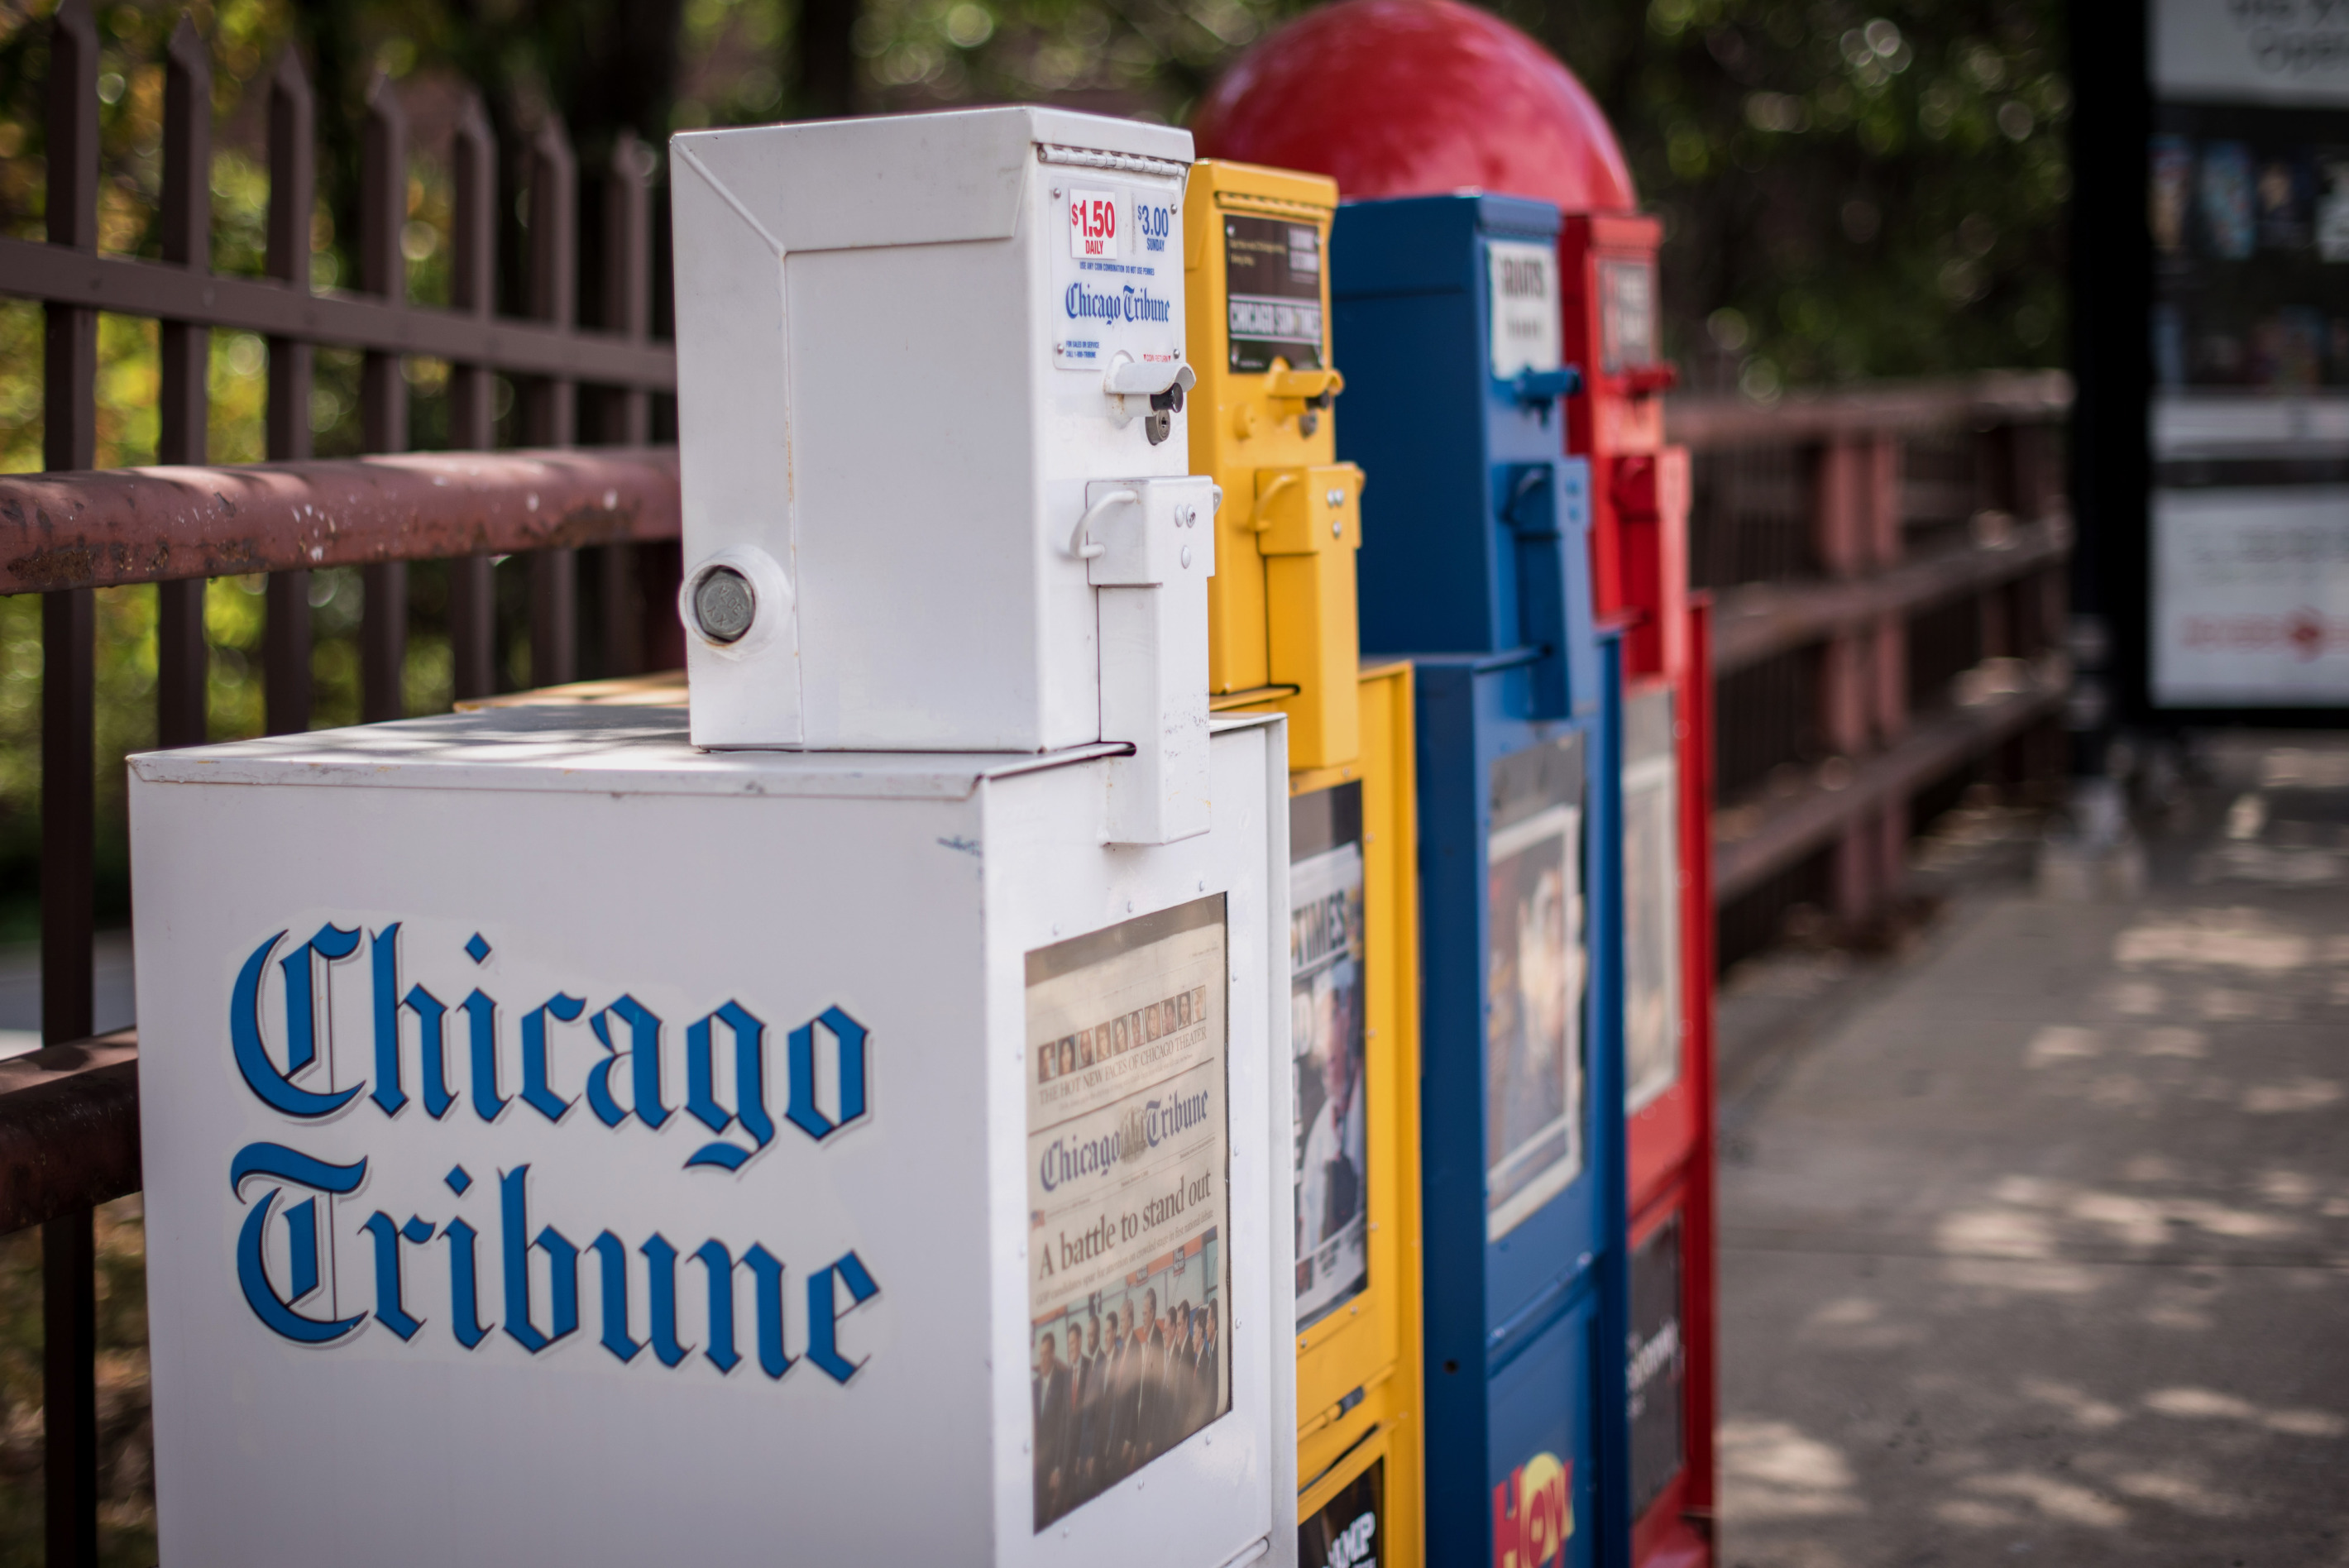 A Chicago Tribune newspaper vending machine or &quot;honor box&quot; sits on a sidewalk in Chicago, Illinois.